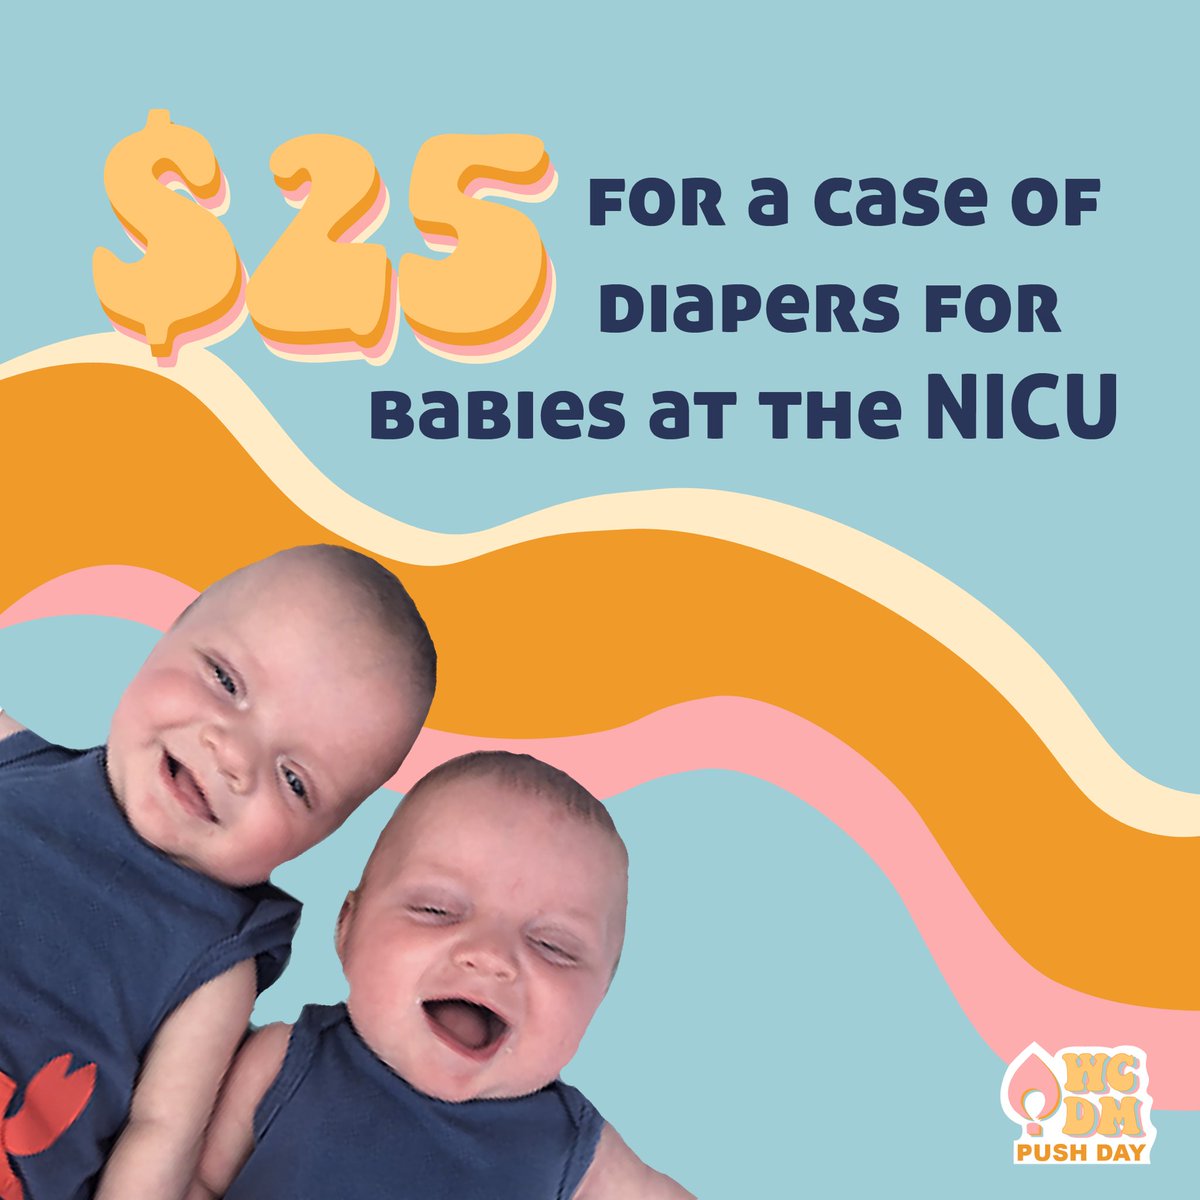 Time for another challenge! We challenge you to fundraise $25 during this hour as it cost $25 on a a case of diapers for babies staying in the NICU! #GroovinOurWayTo40K